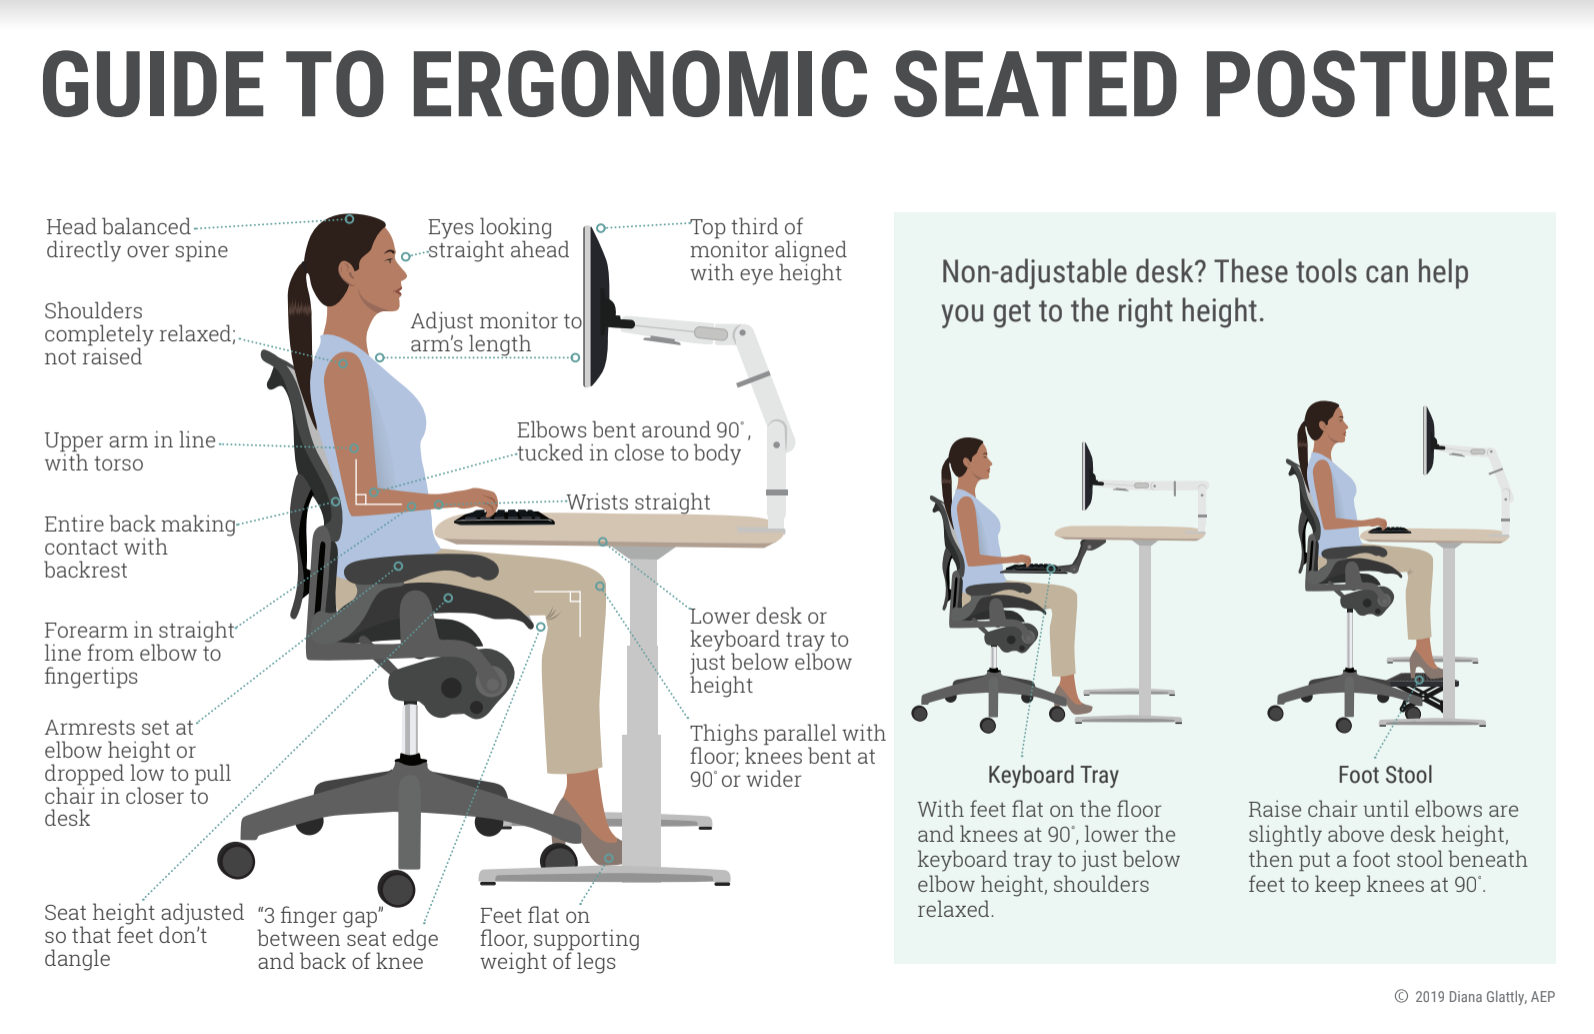 Recommendation for a good posture while working remotely in front of a computer